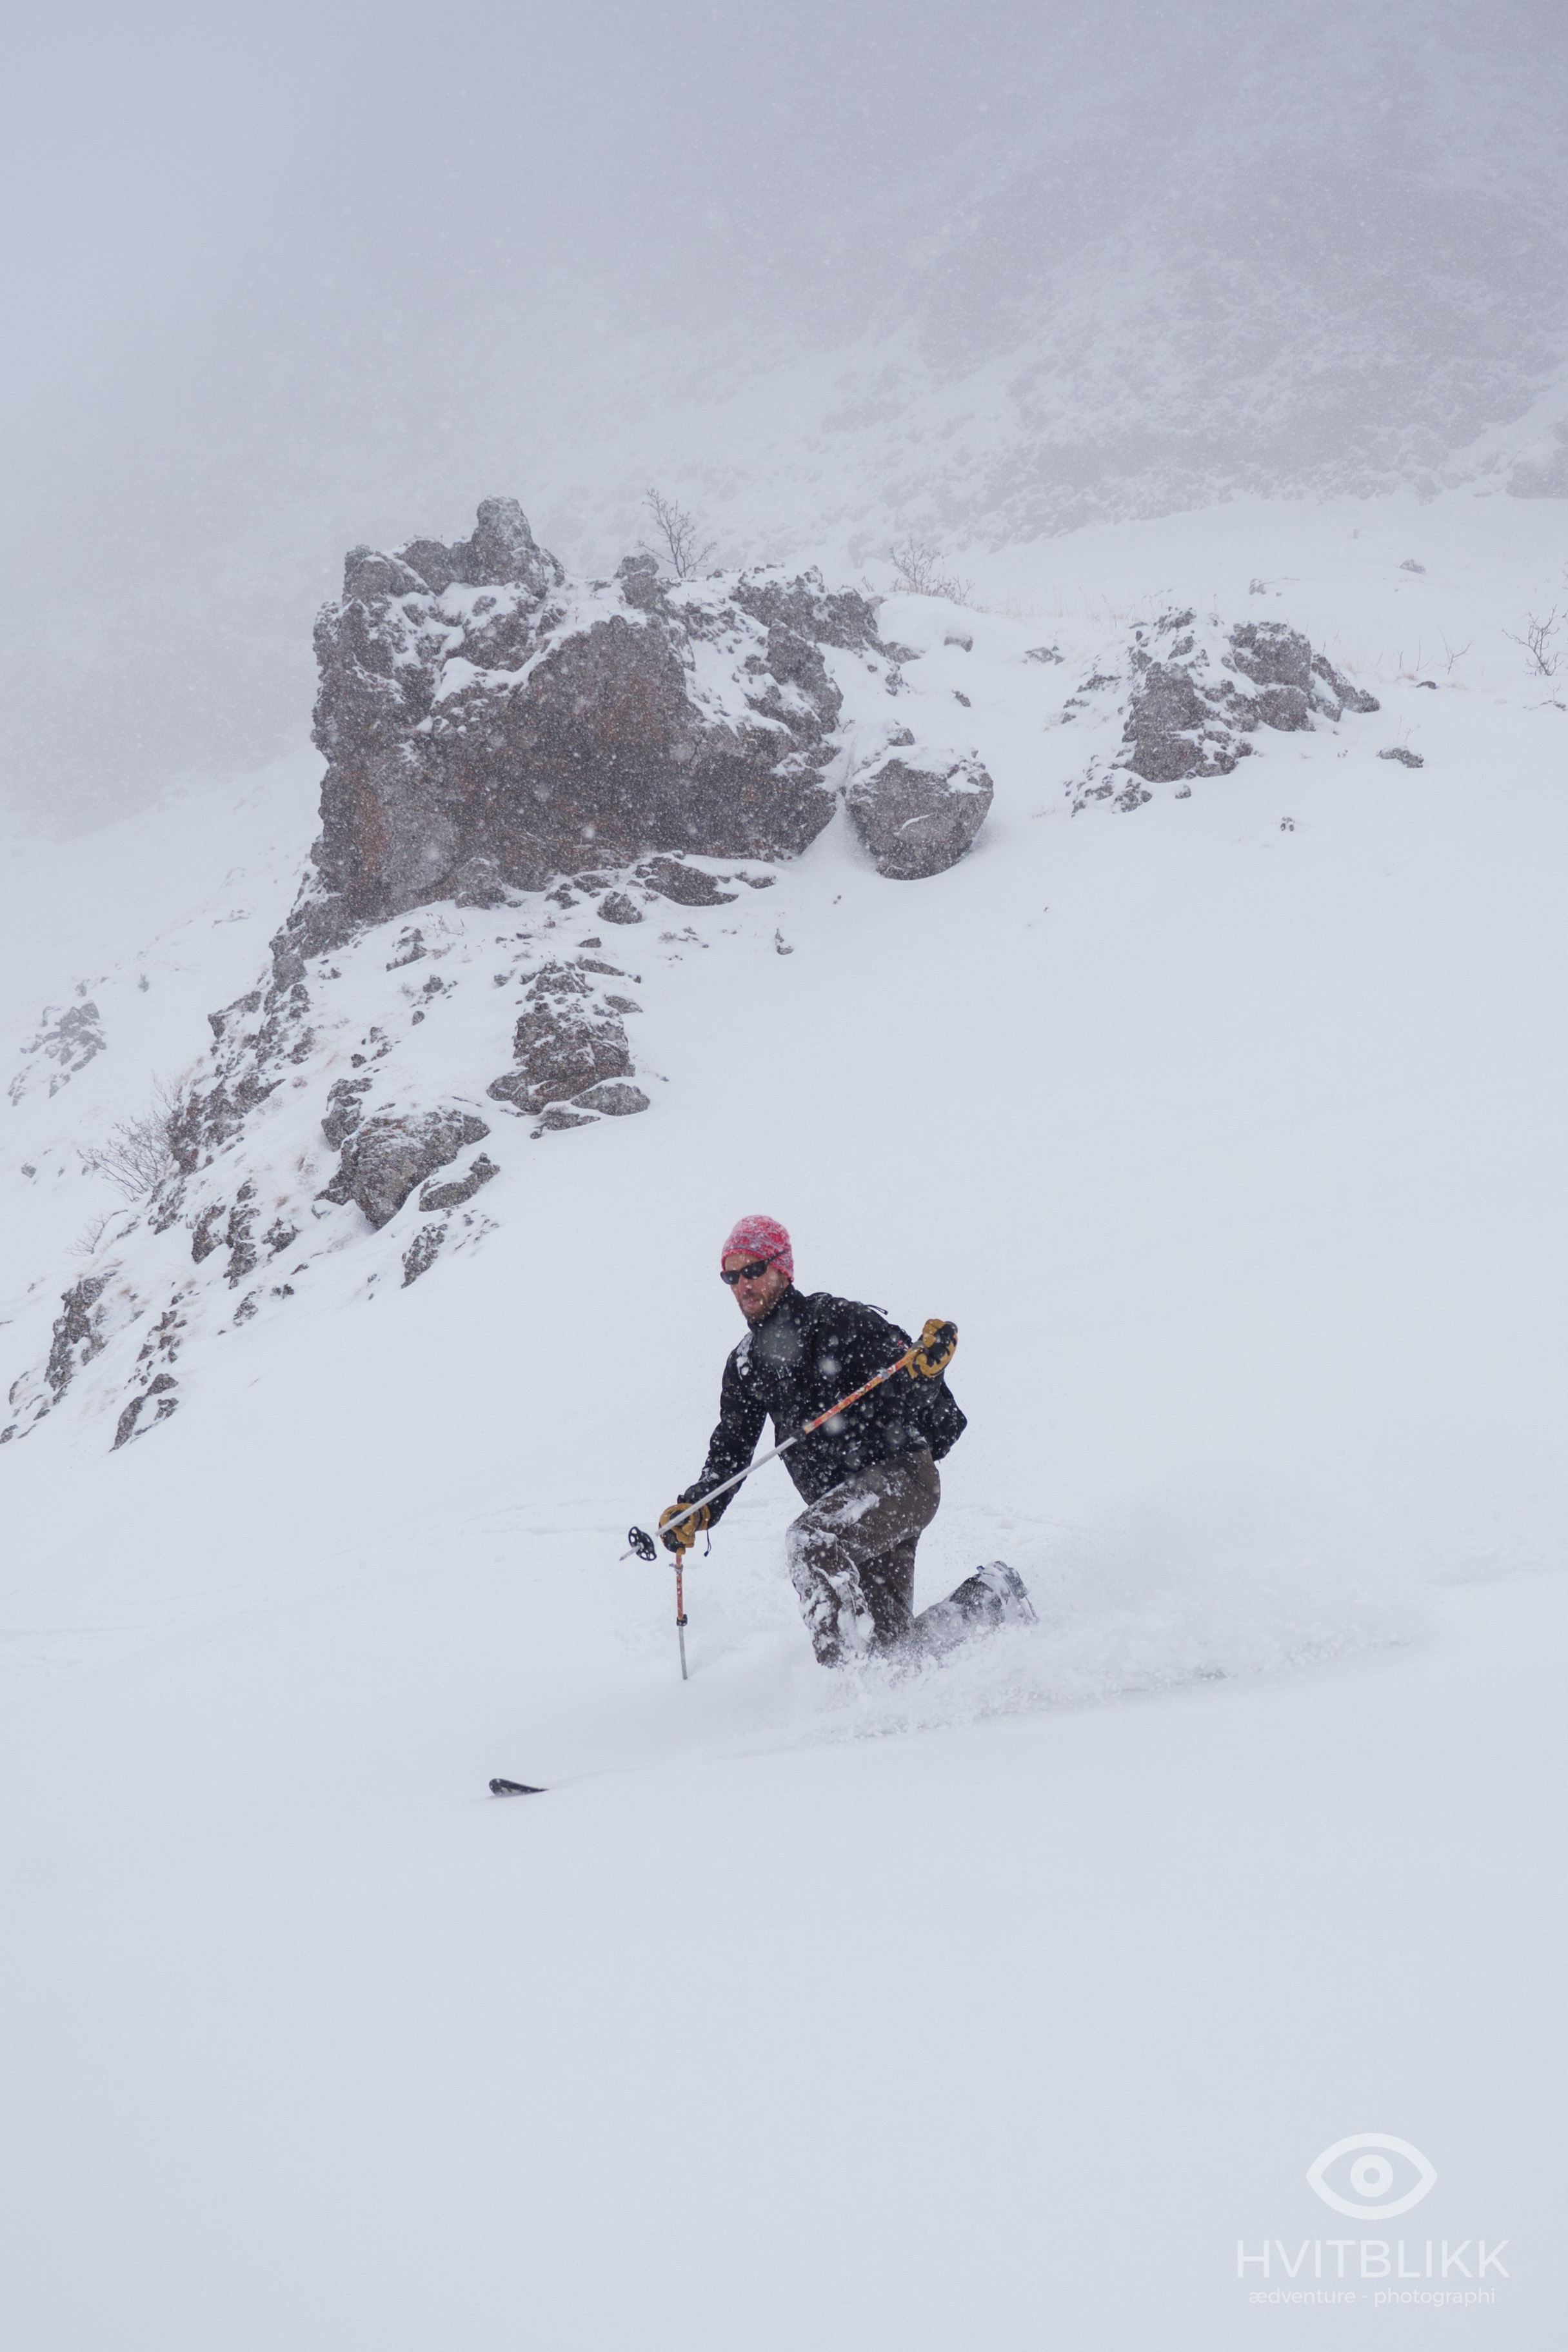  Mt Araler does not only have a religious mysticism, but also offers exciting opportunities for good skiing. Here, Christoph Herby enoys the deep telemark turns, just an hour's drive away from the city of Yerevan. 